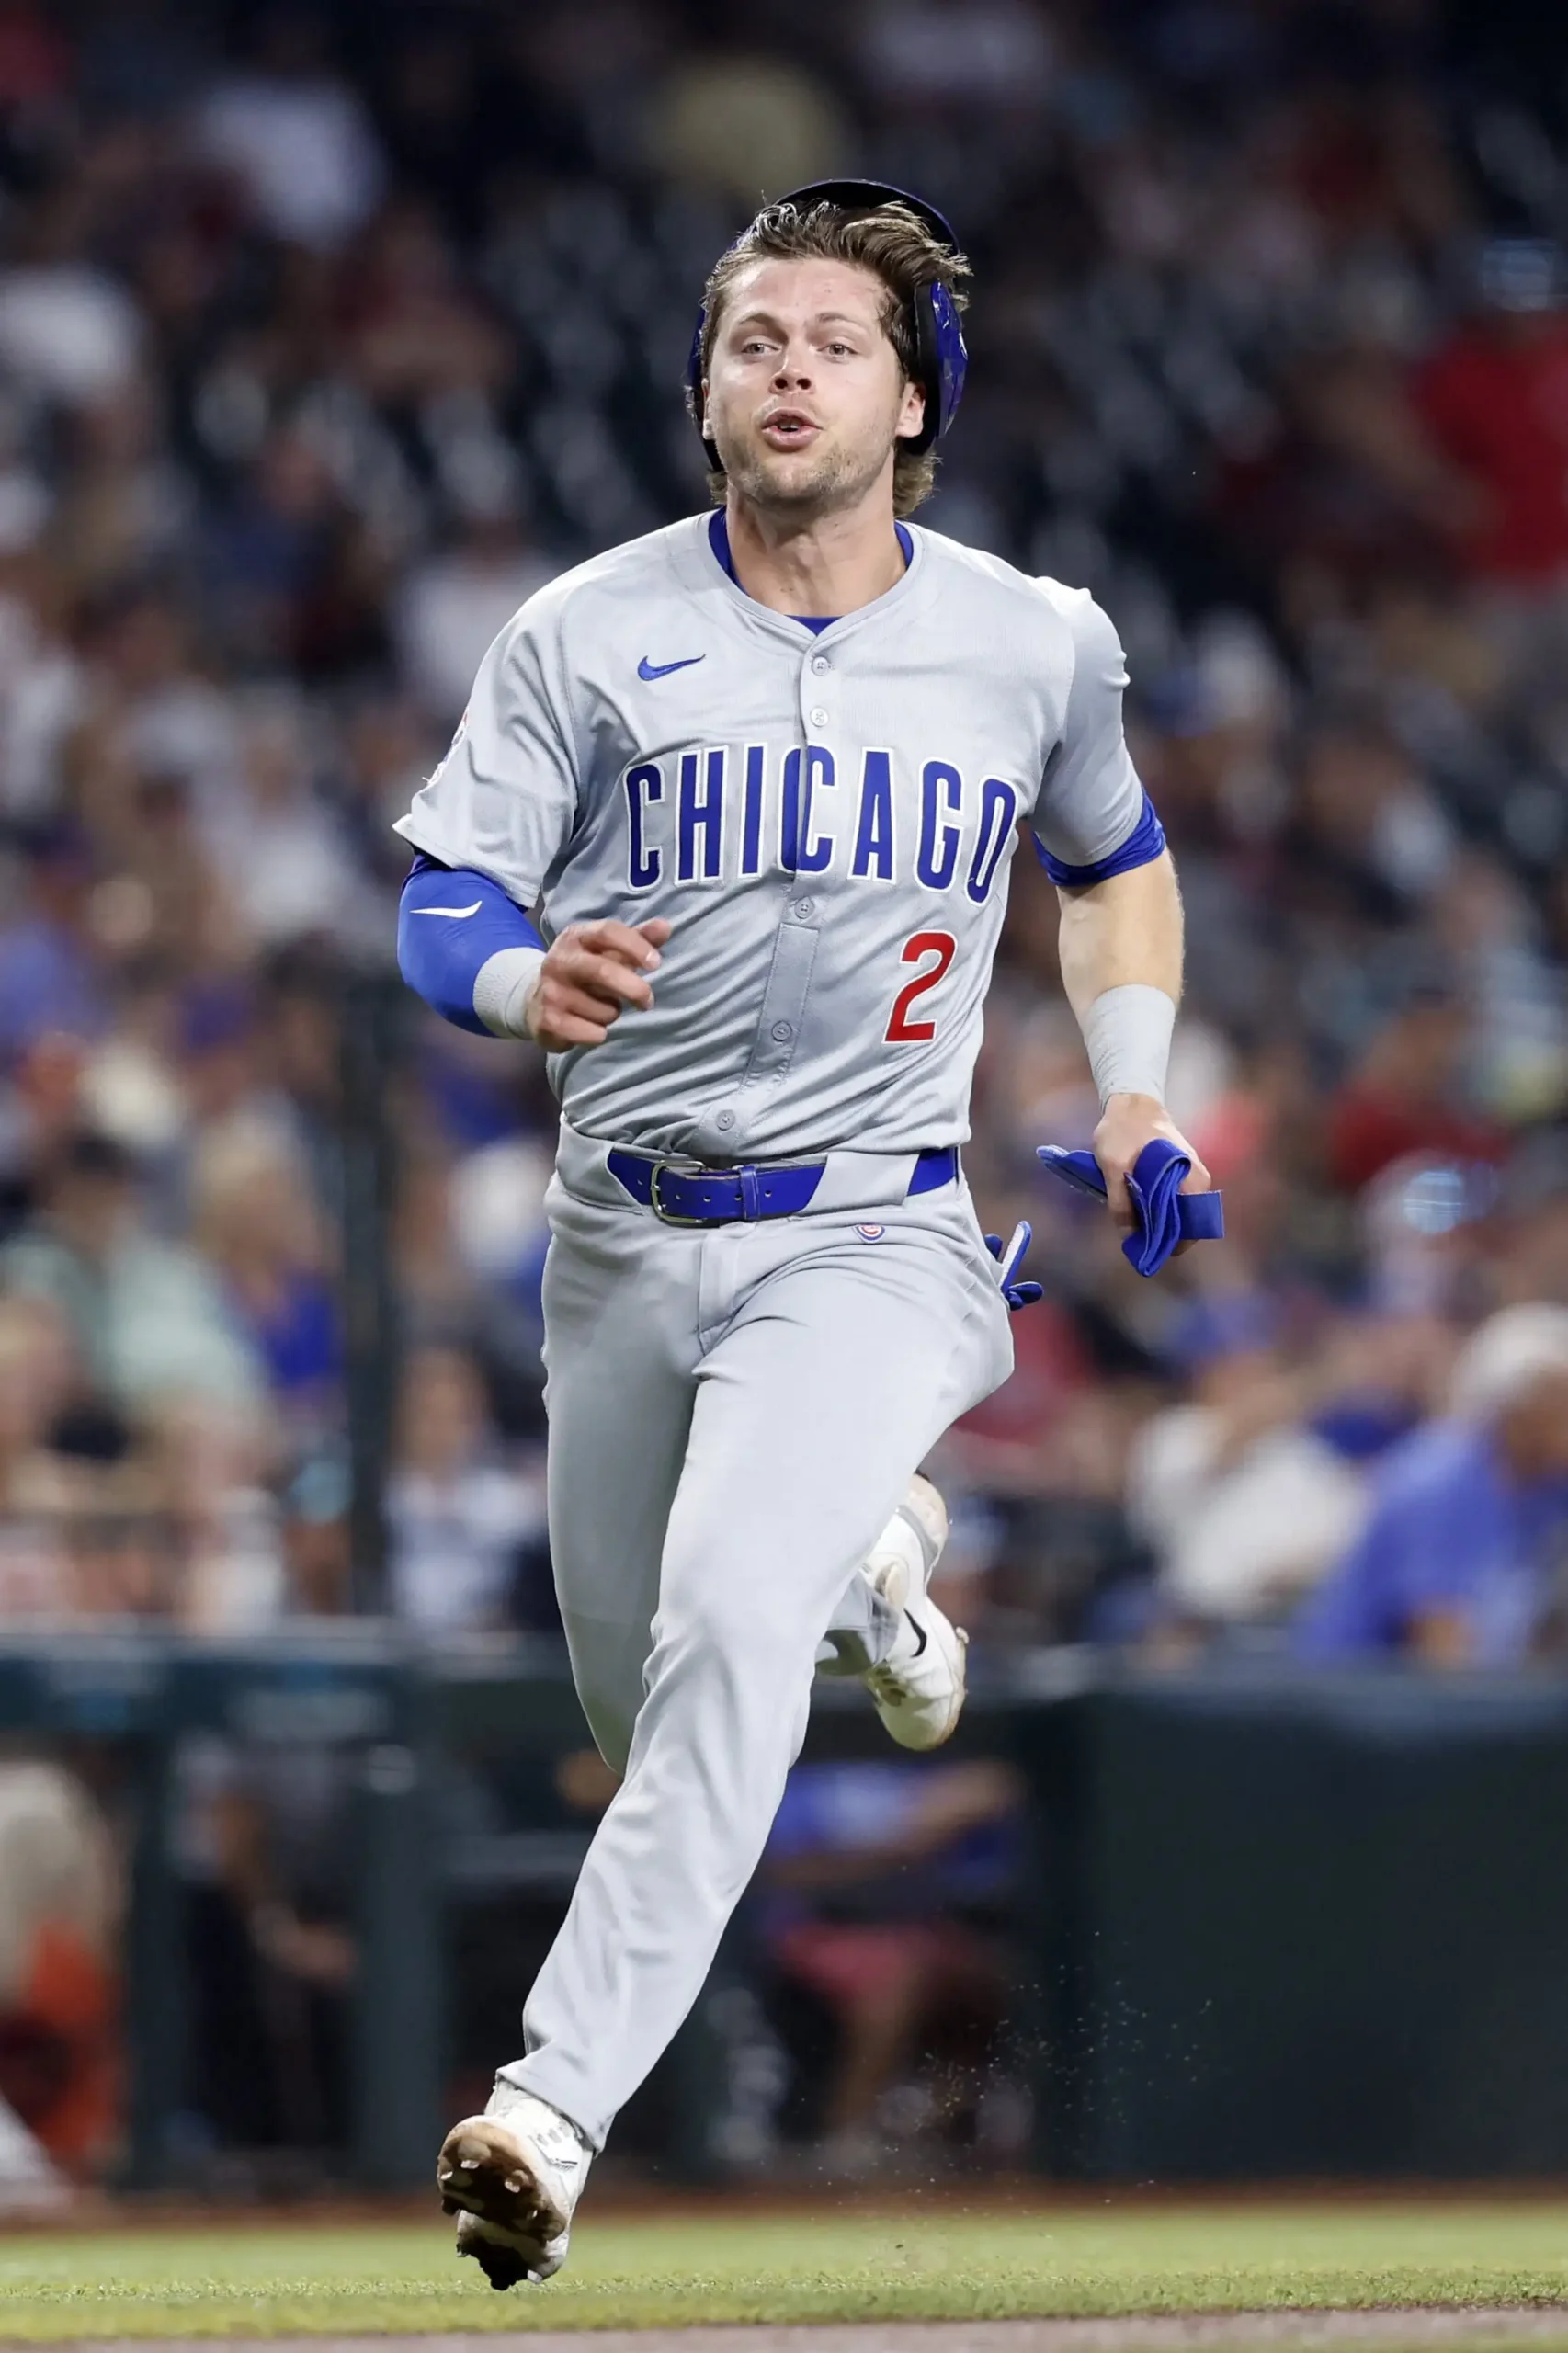 Take Cubs to Stay Strong Against Marlins in MLB Pro Picks